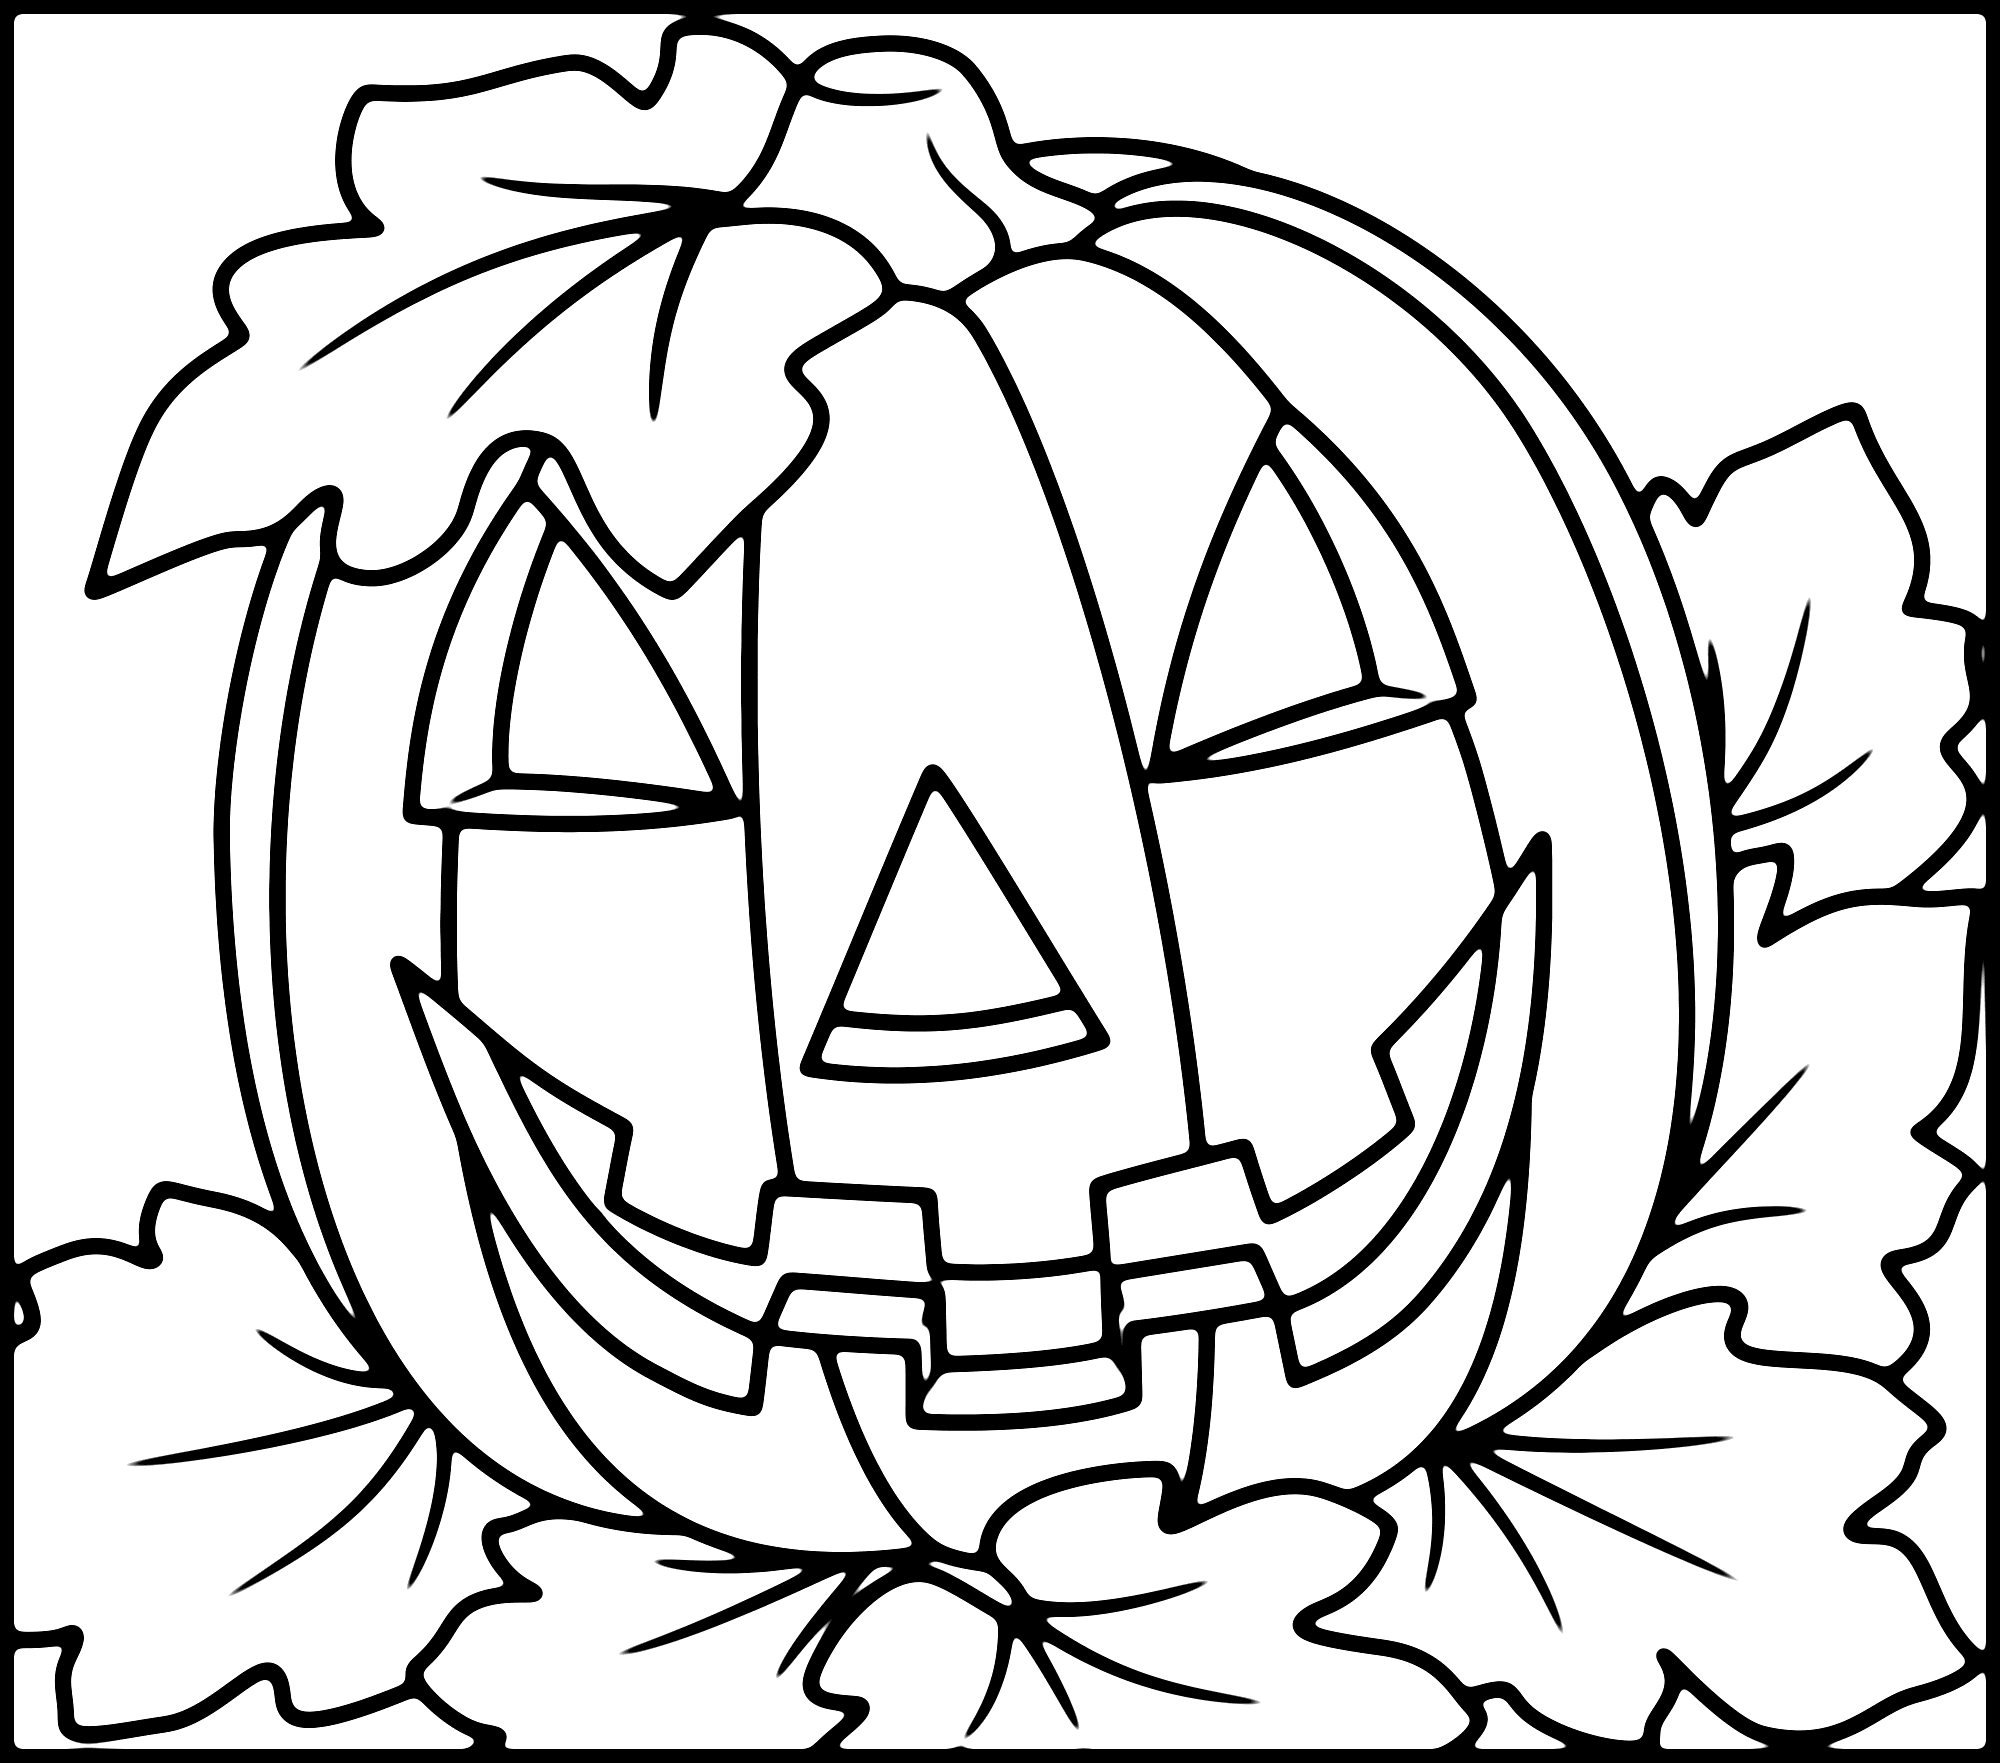 Carved Pumpkin Halloween Coloring Page